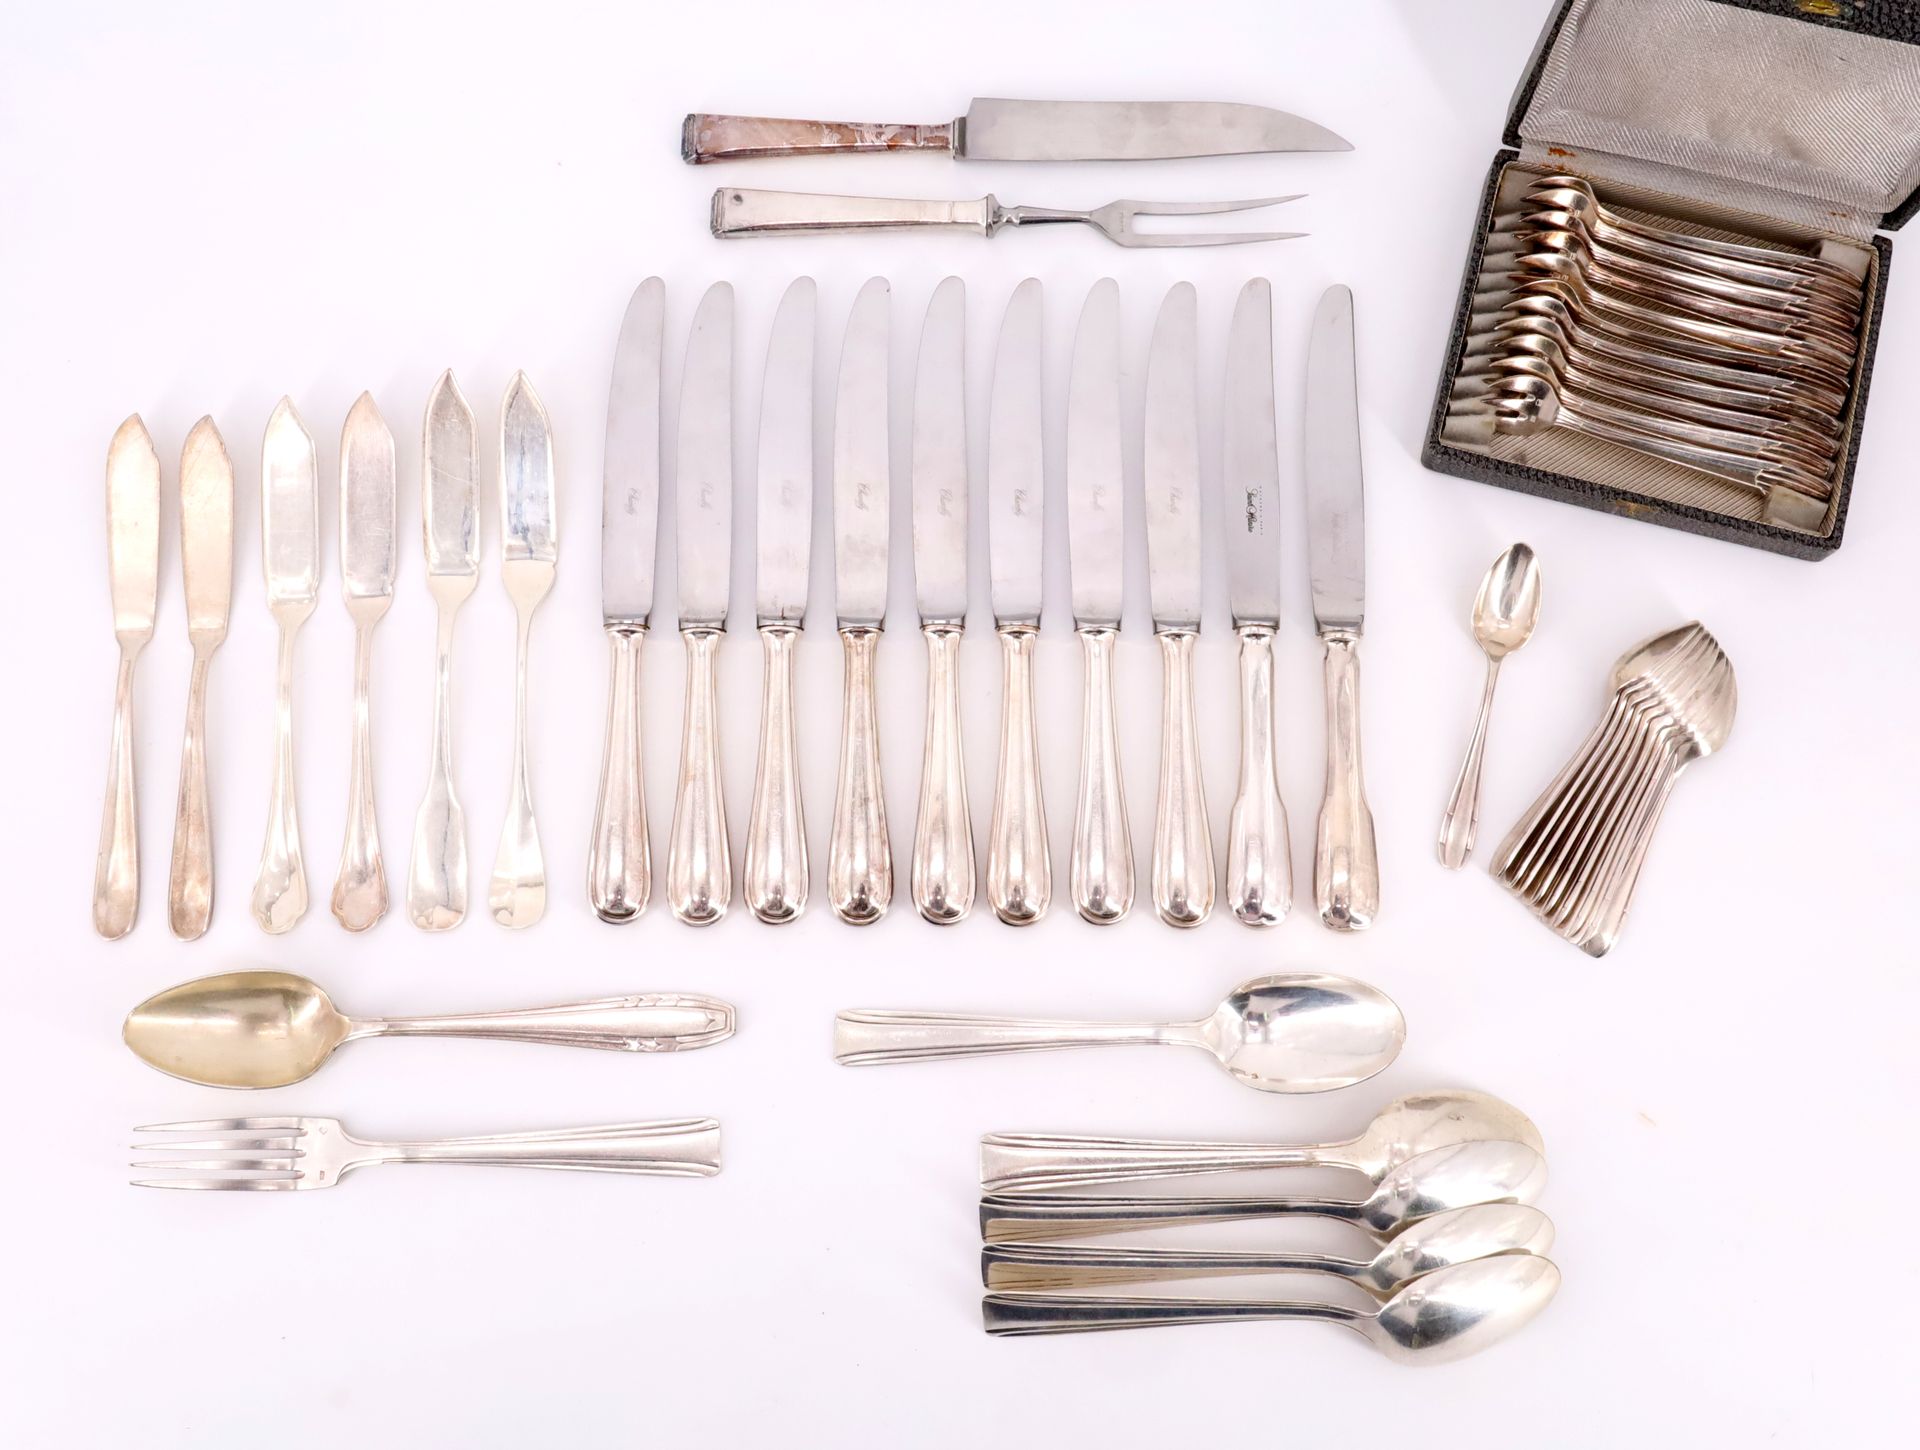 Null Lot including :

Six silver plated table spoons.

One silver plated table f&hellip;